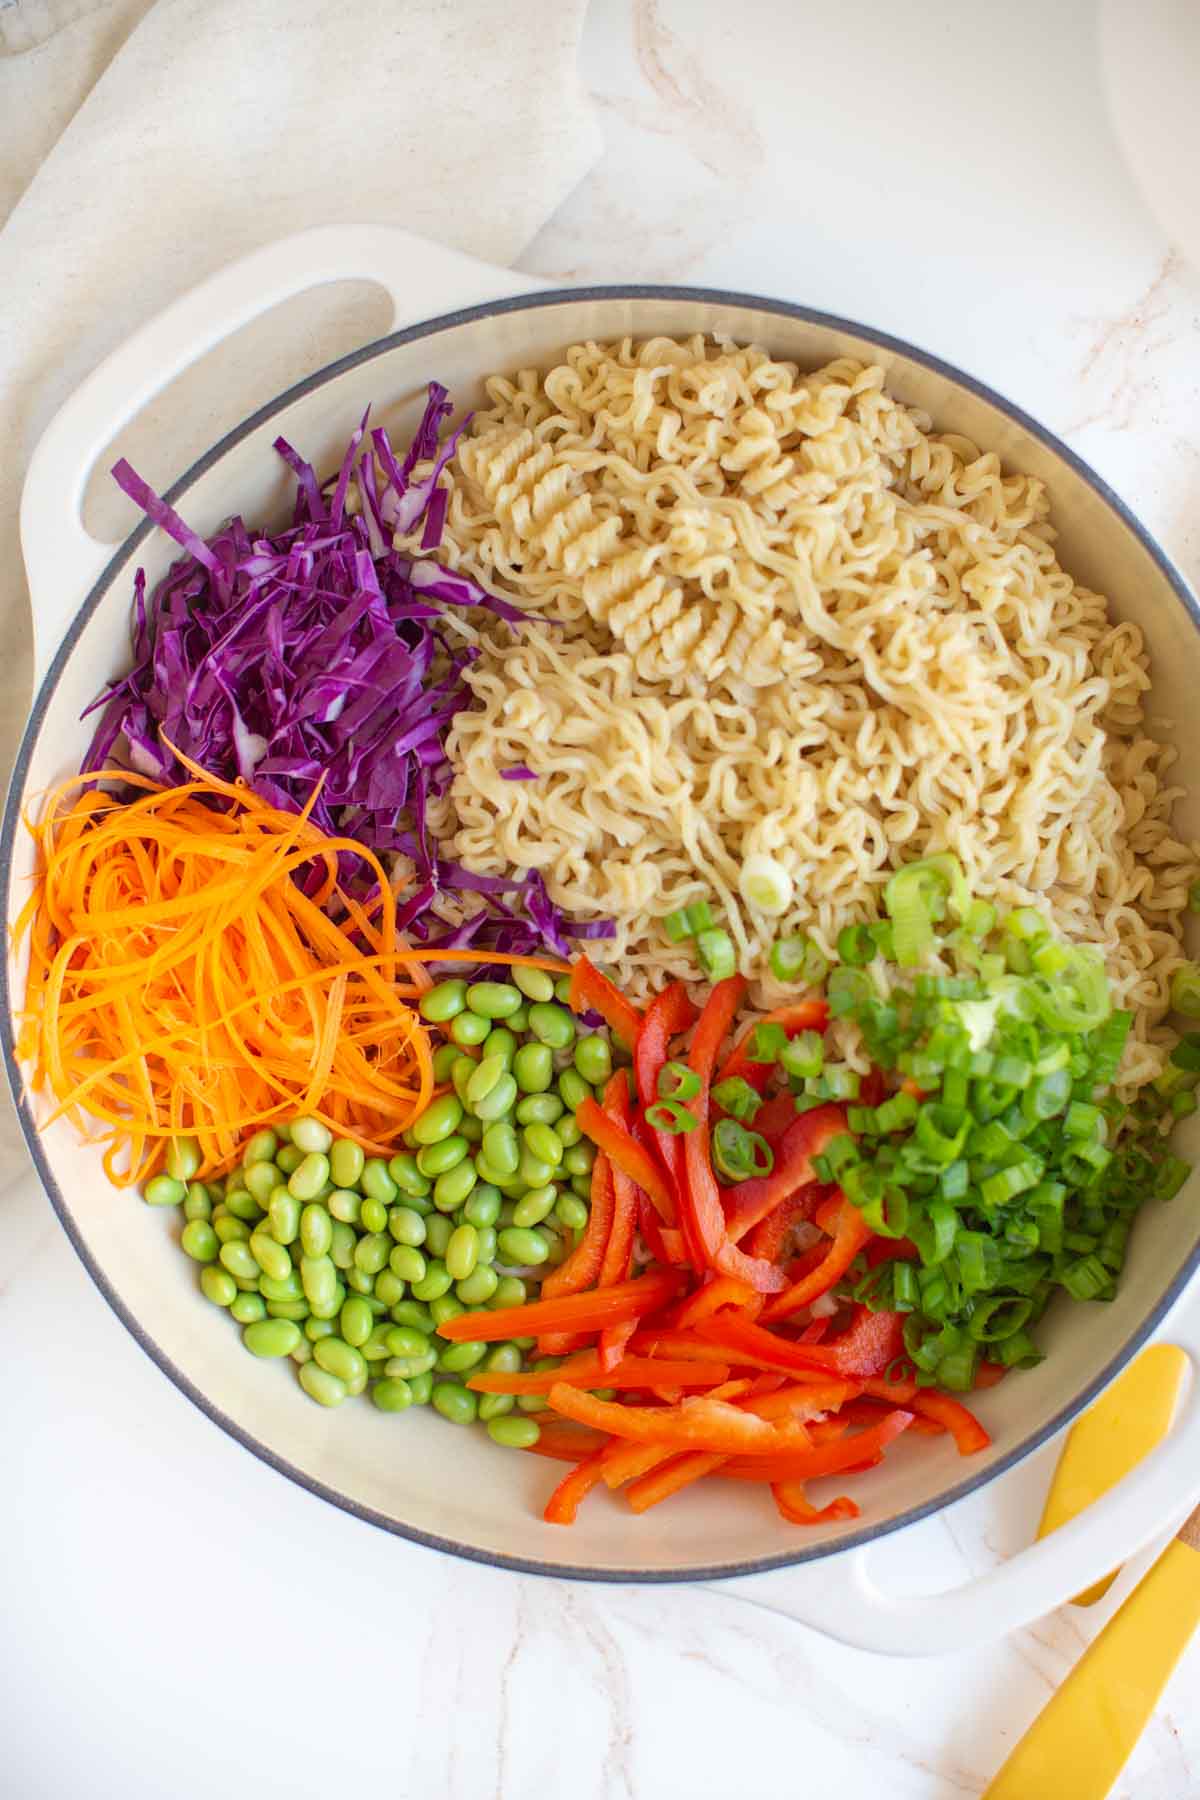 Ingredient flatlay with cooked ramen noodles, green onions, red bell pepper, edamame, carrots, and cabbage. 